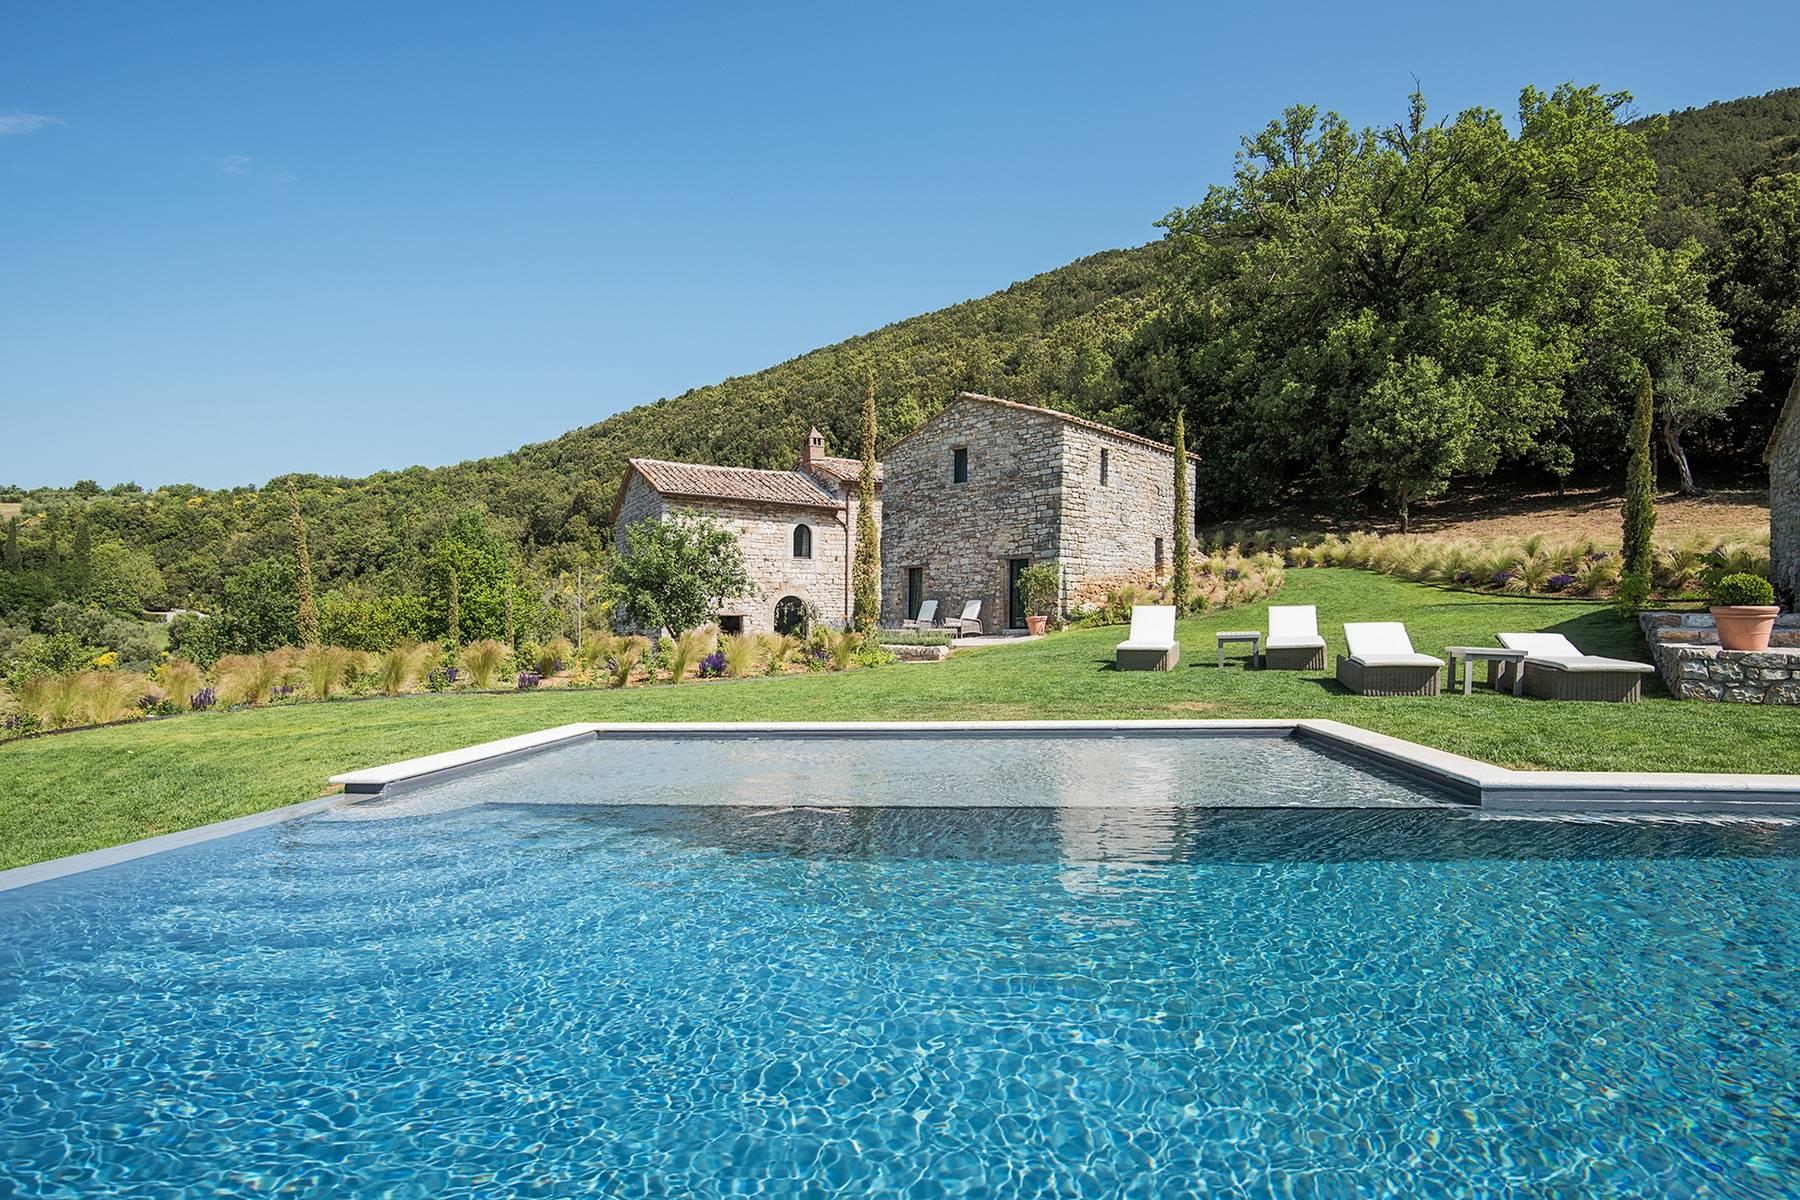 Complete privacy and luxury amidst the picturesque Umbrian countryside - 2